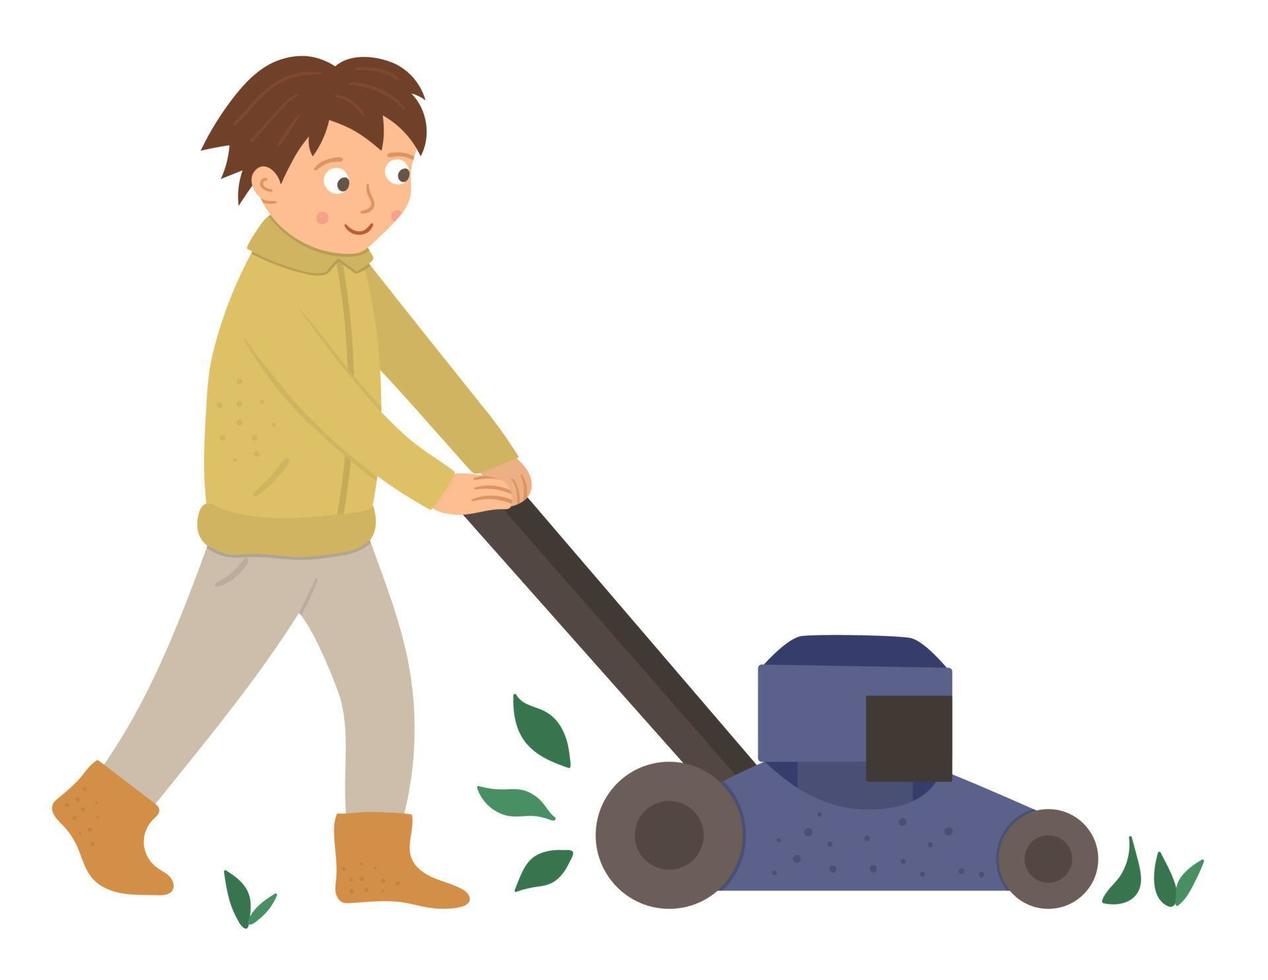 Vector illustration of a boy cutting grass with lawn mower isolated on white background. Cute kid doing garden work. Spring gardening activity picture with funny character.